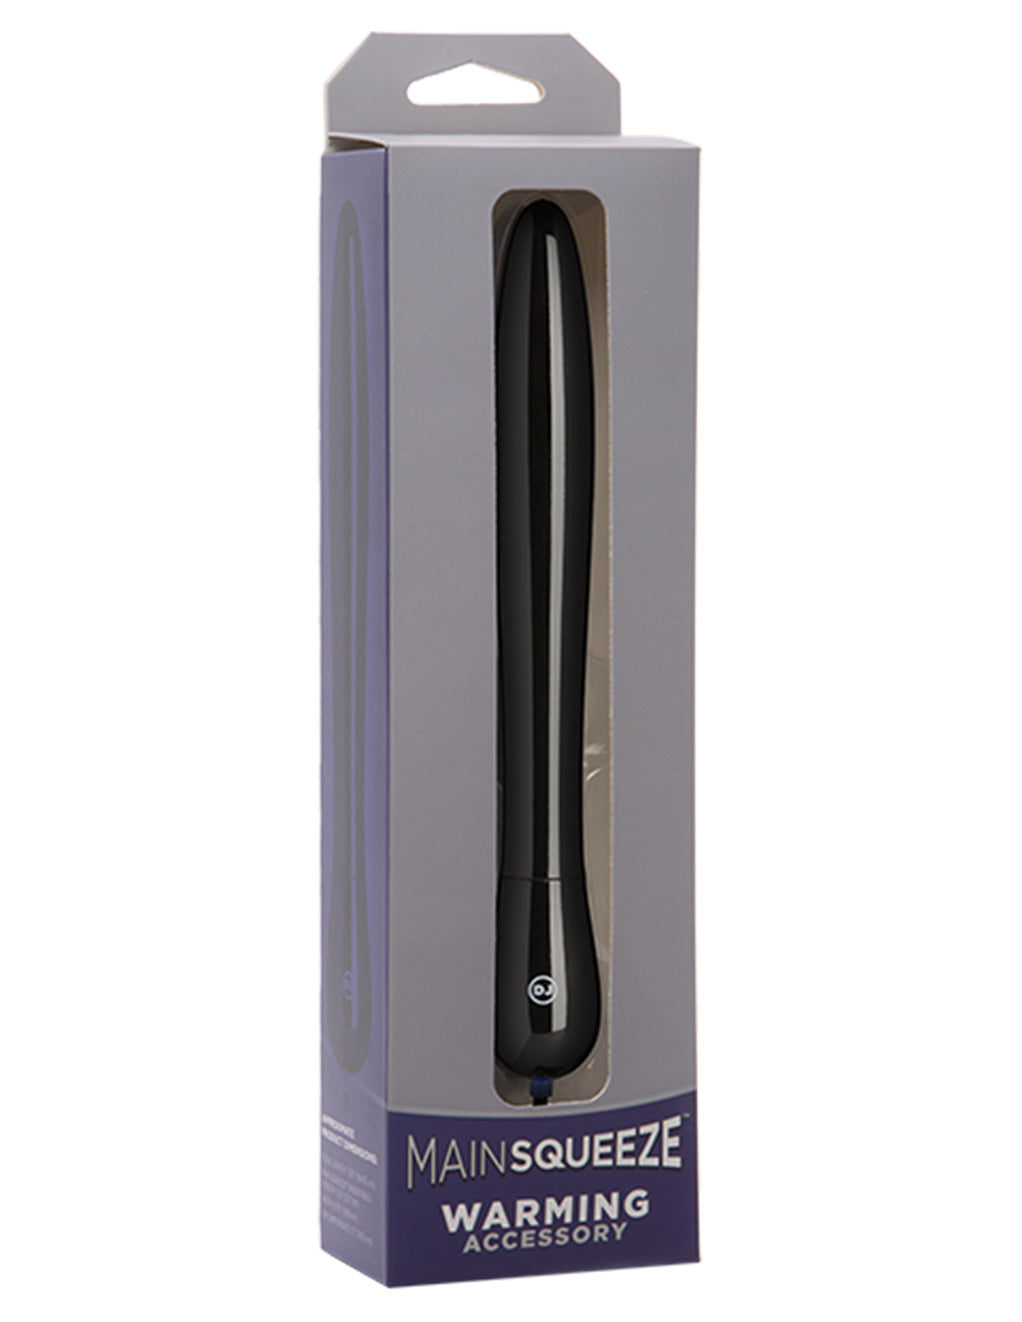 Main Squeeze Warming Accessory - Novelties - Accessories